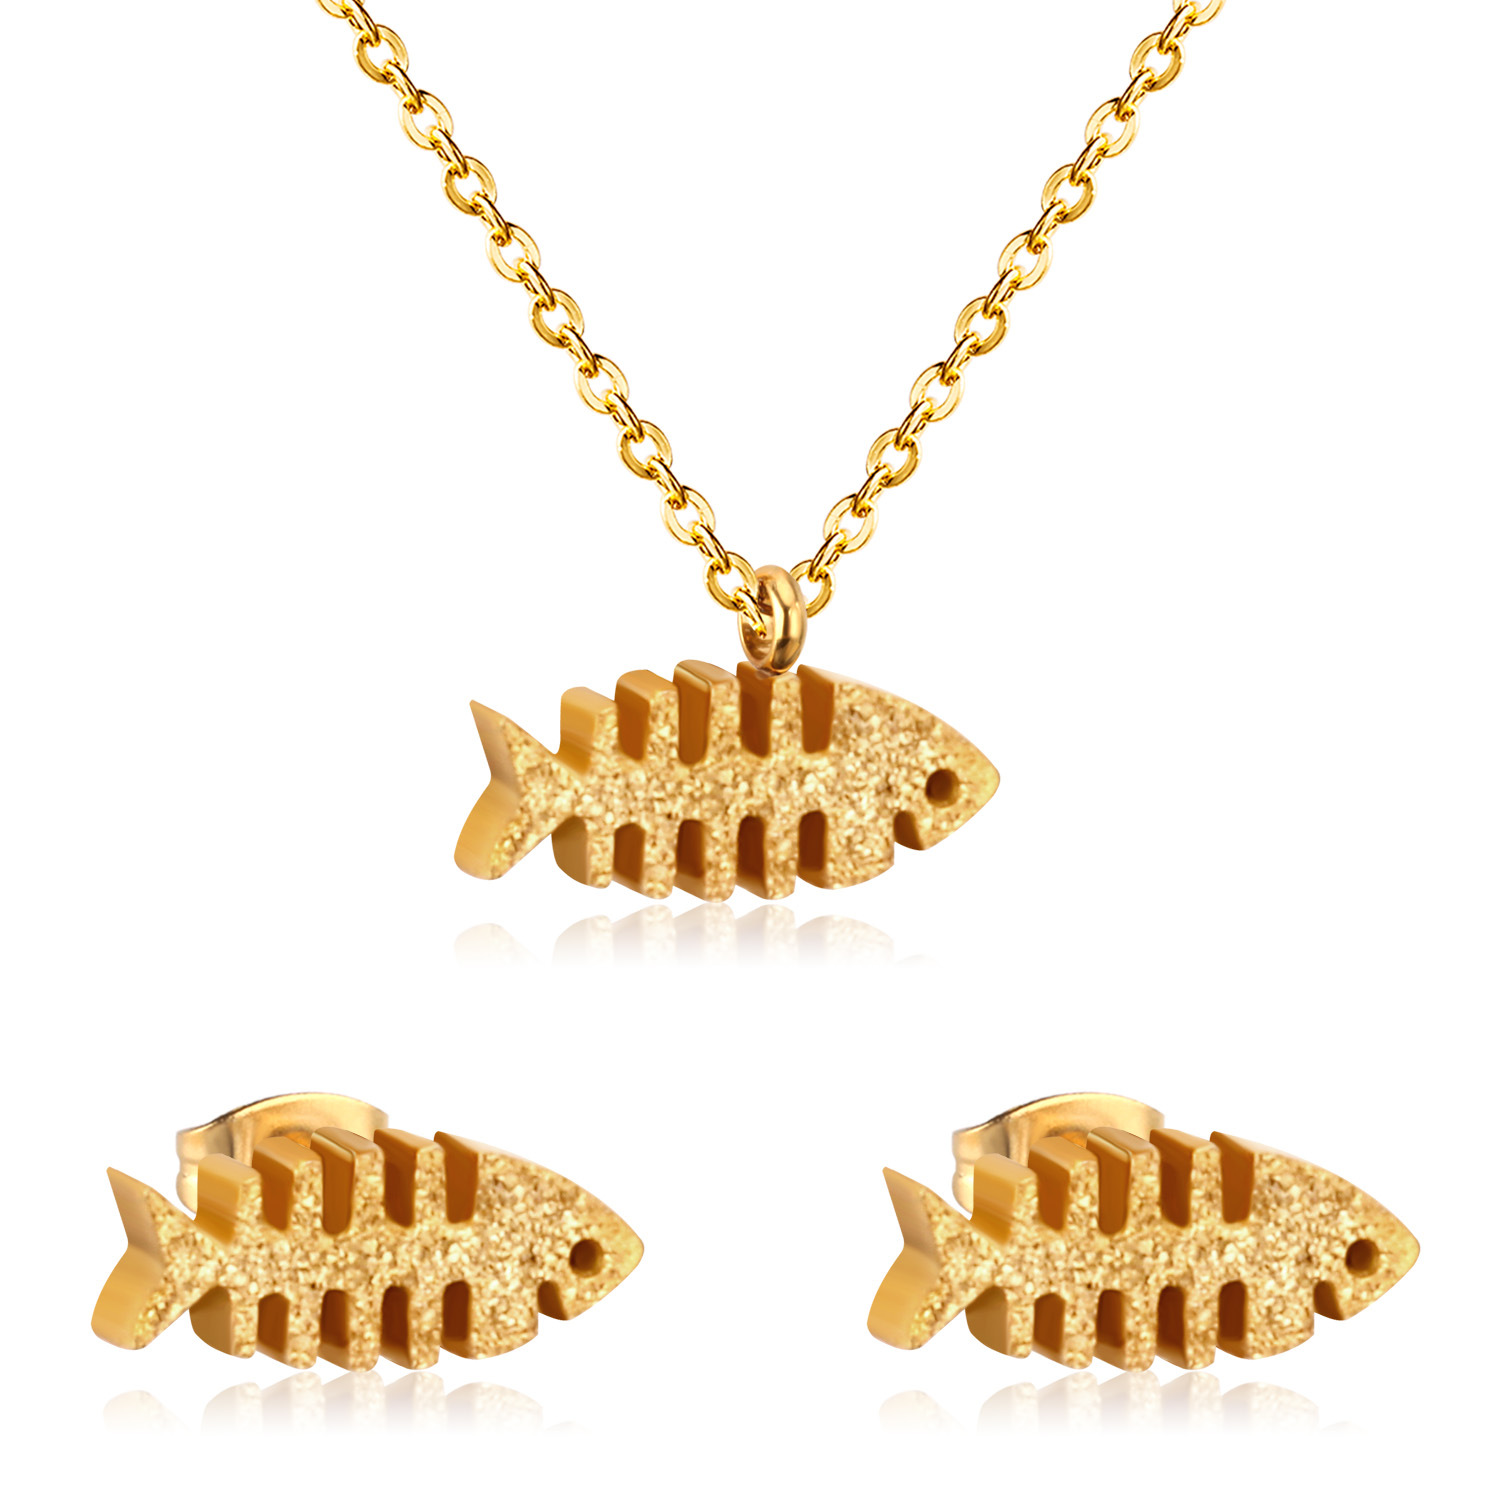 4:Frosted Gold Fishbone